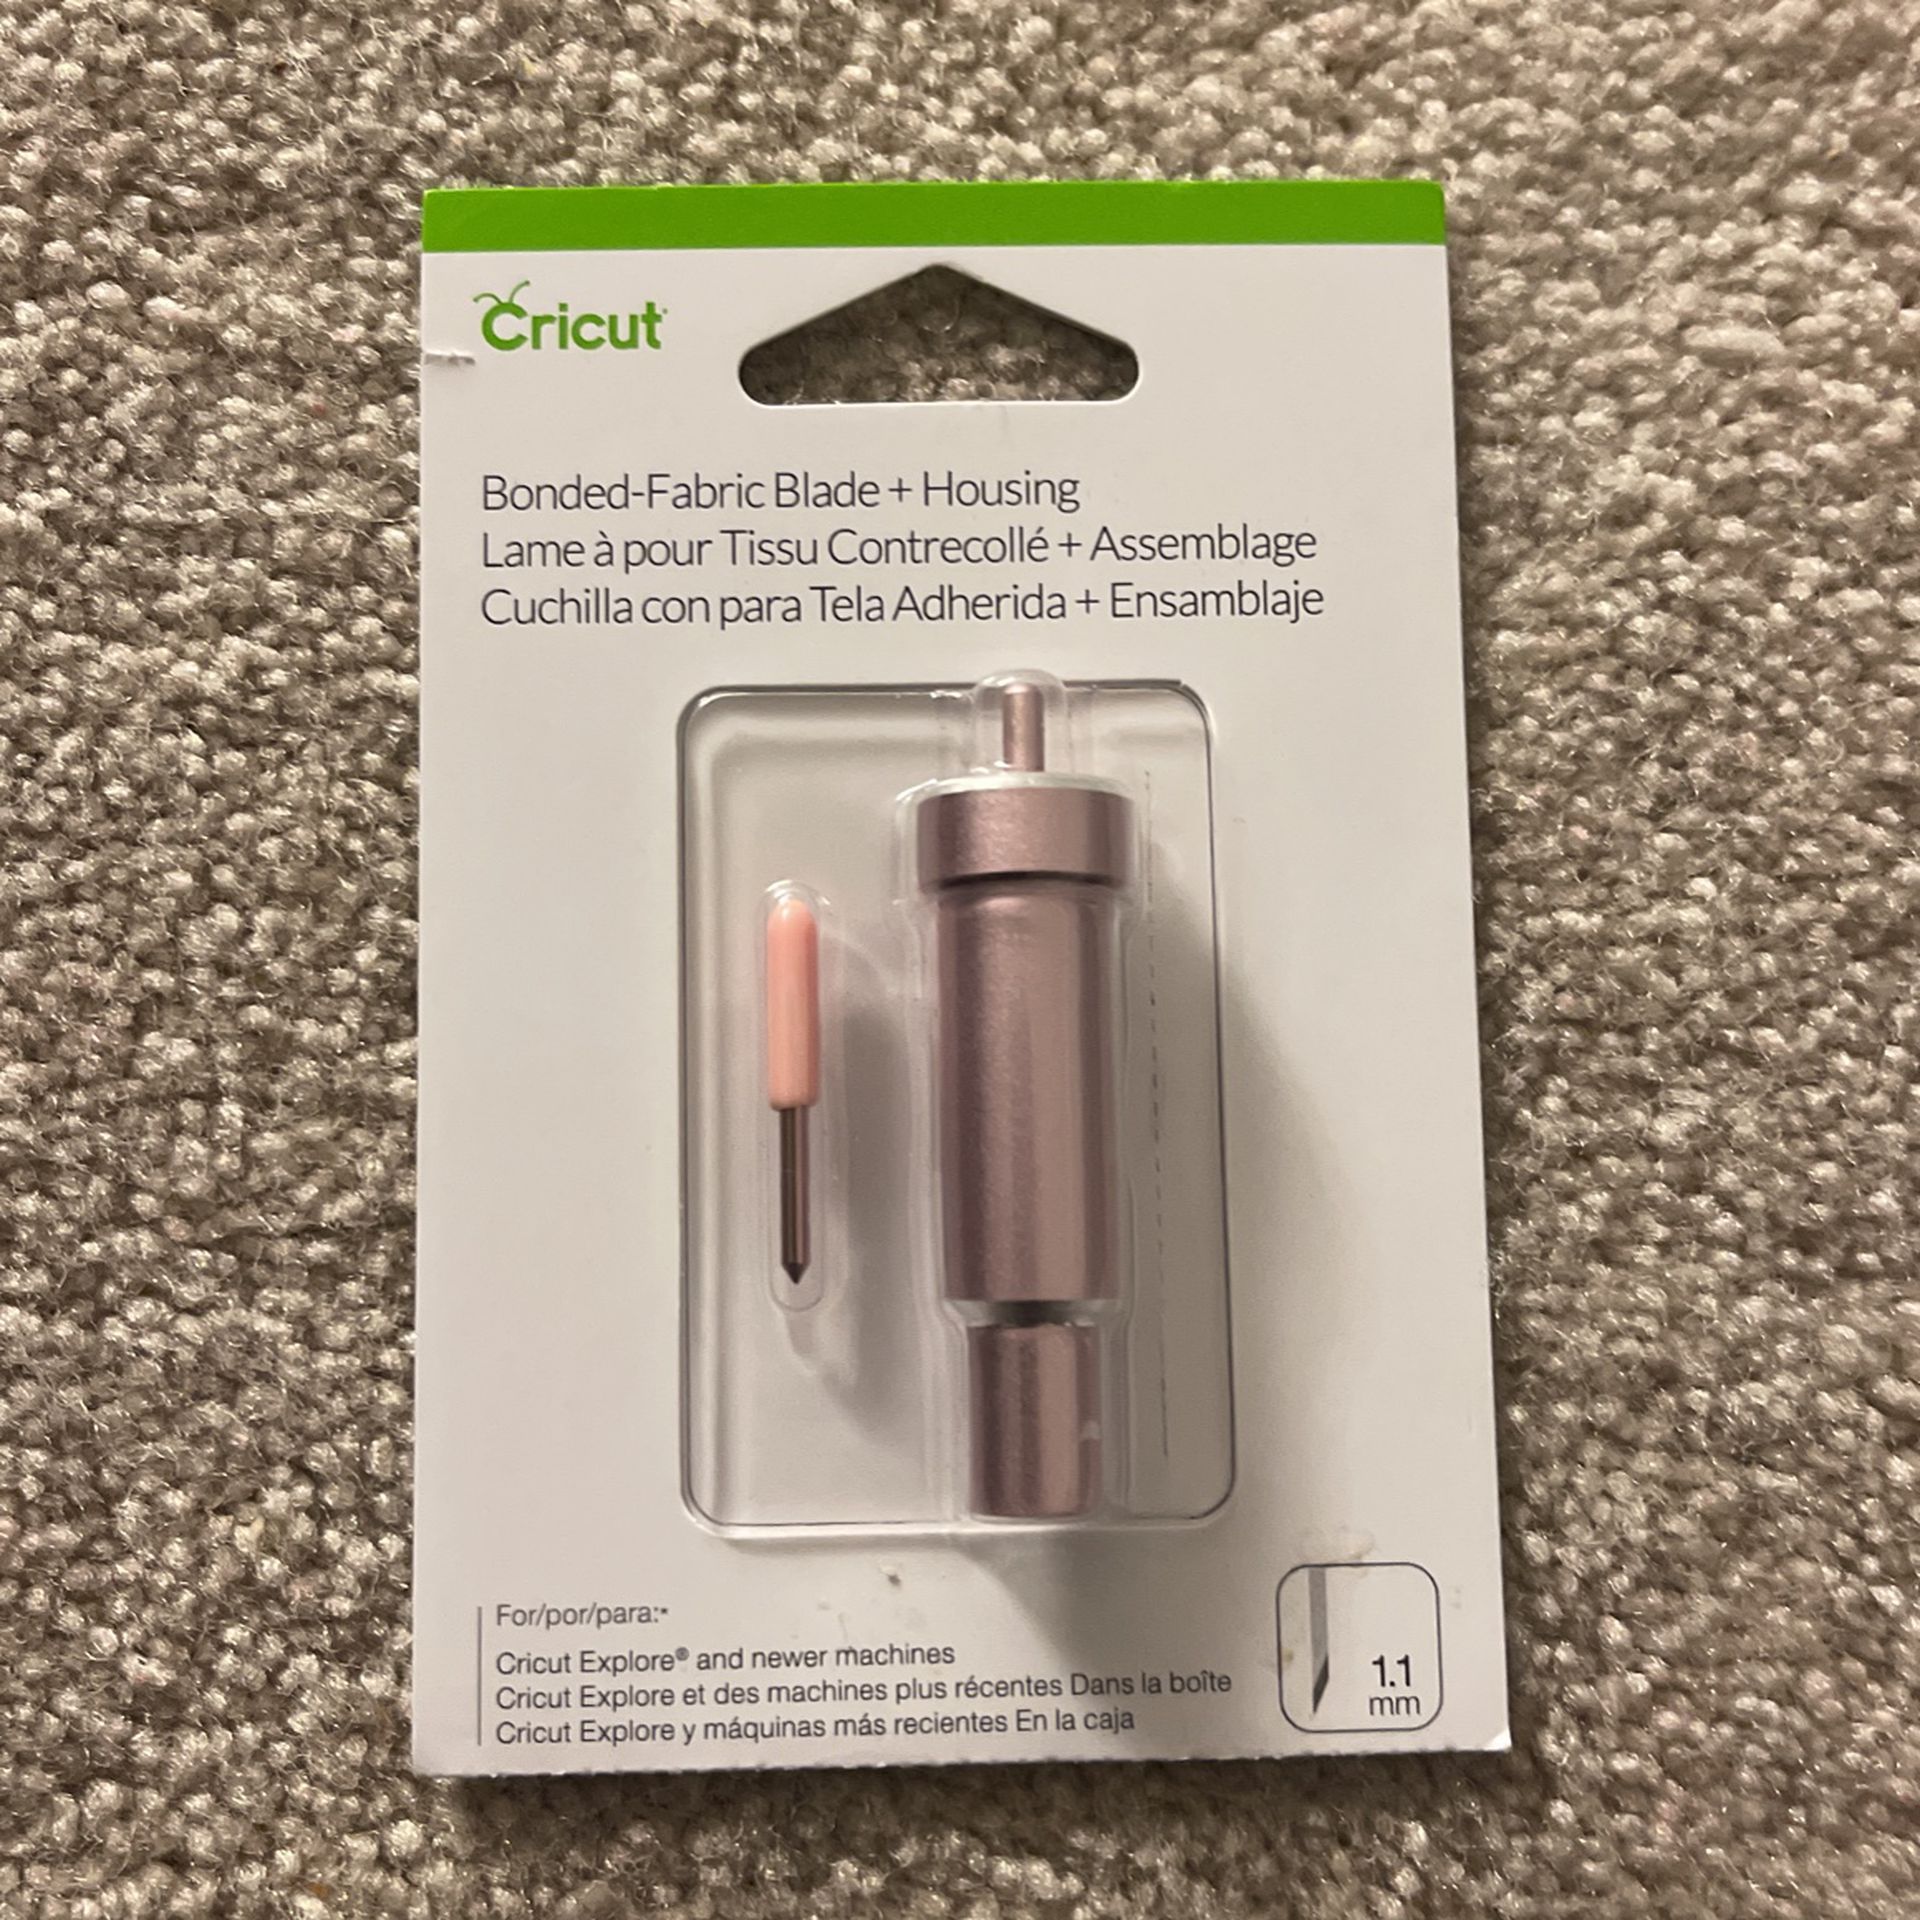 Cricut Bonded Fabric Blade and Housing